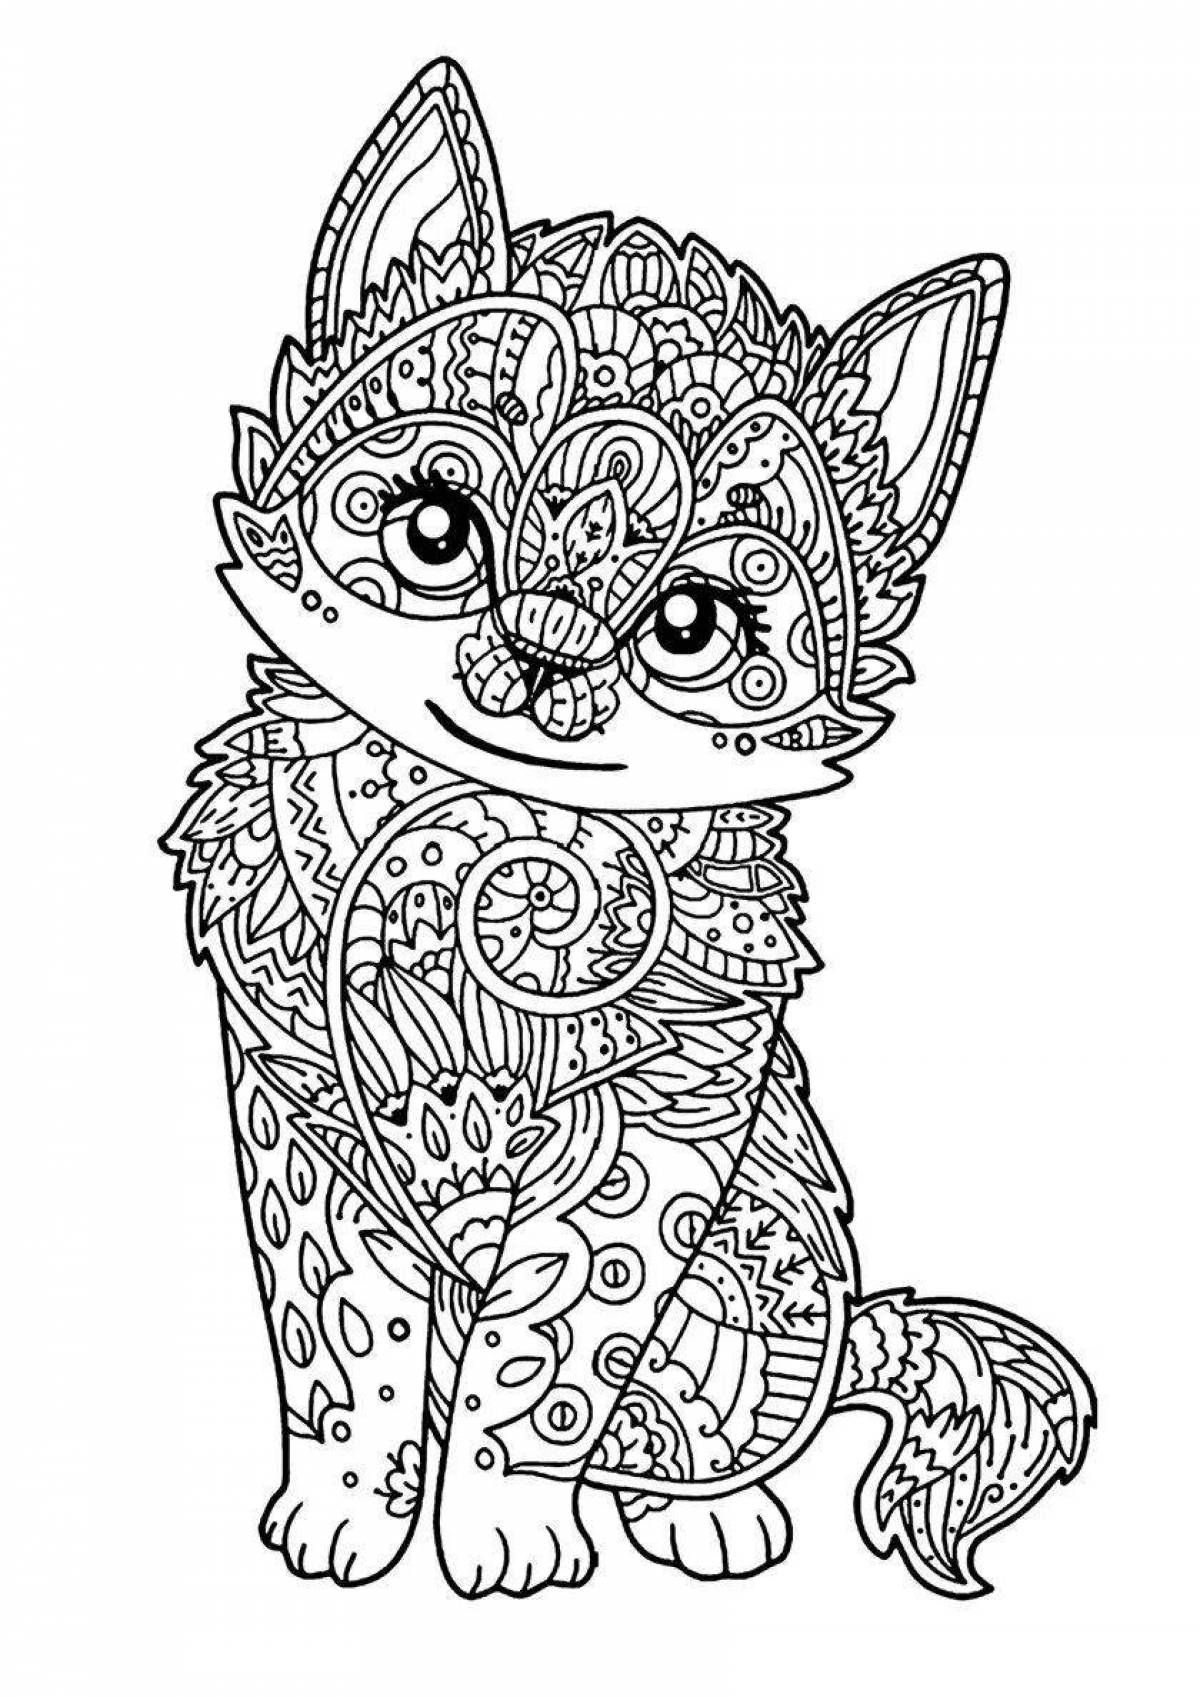 Cute patterned cat coloring page